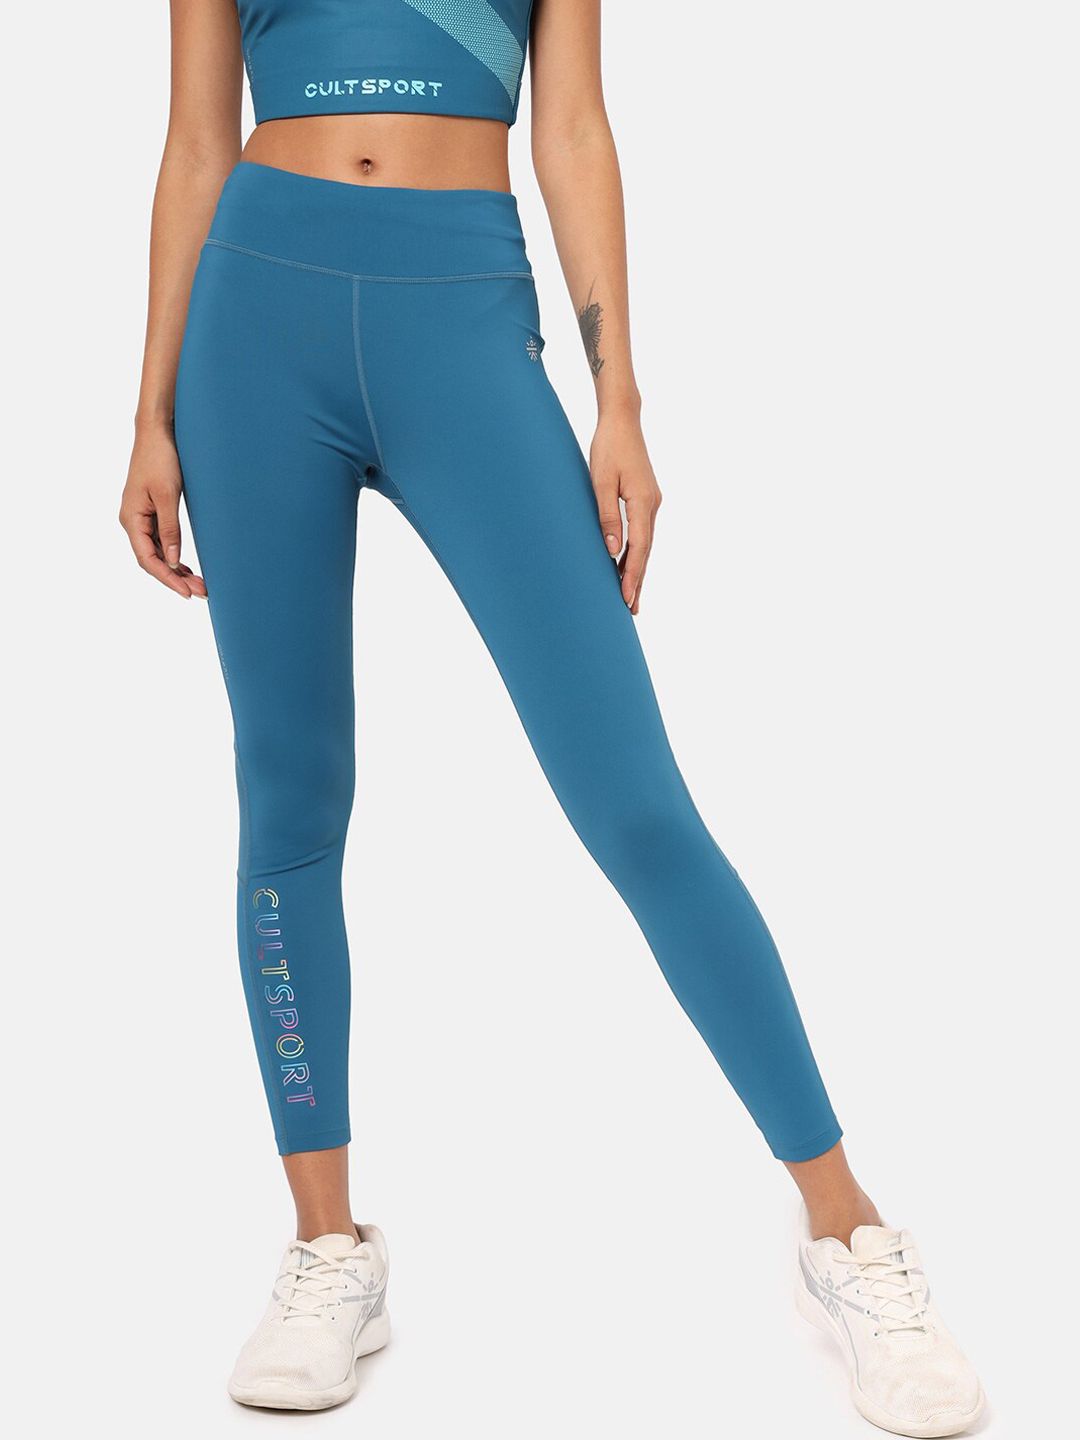 Cultsport Women Teal-Blue Solid Antimicrobial Tights Price in India